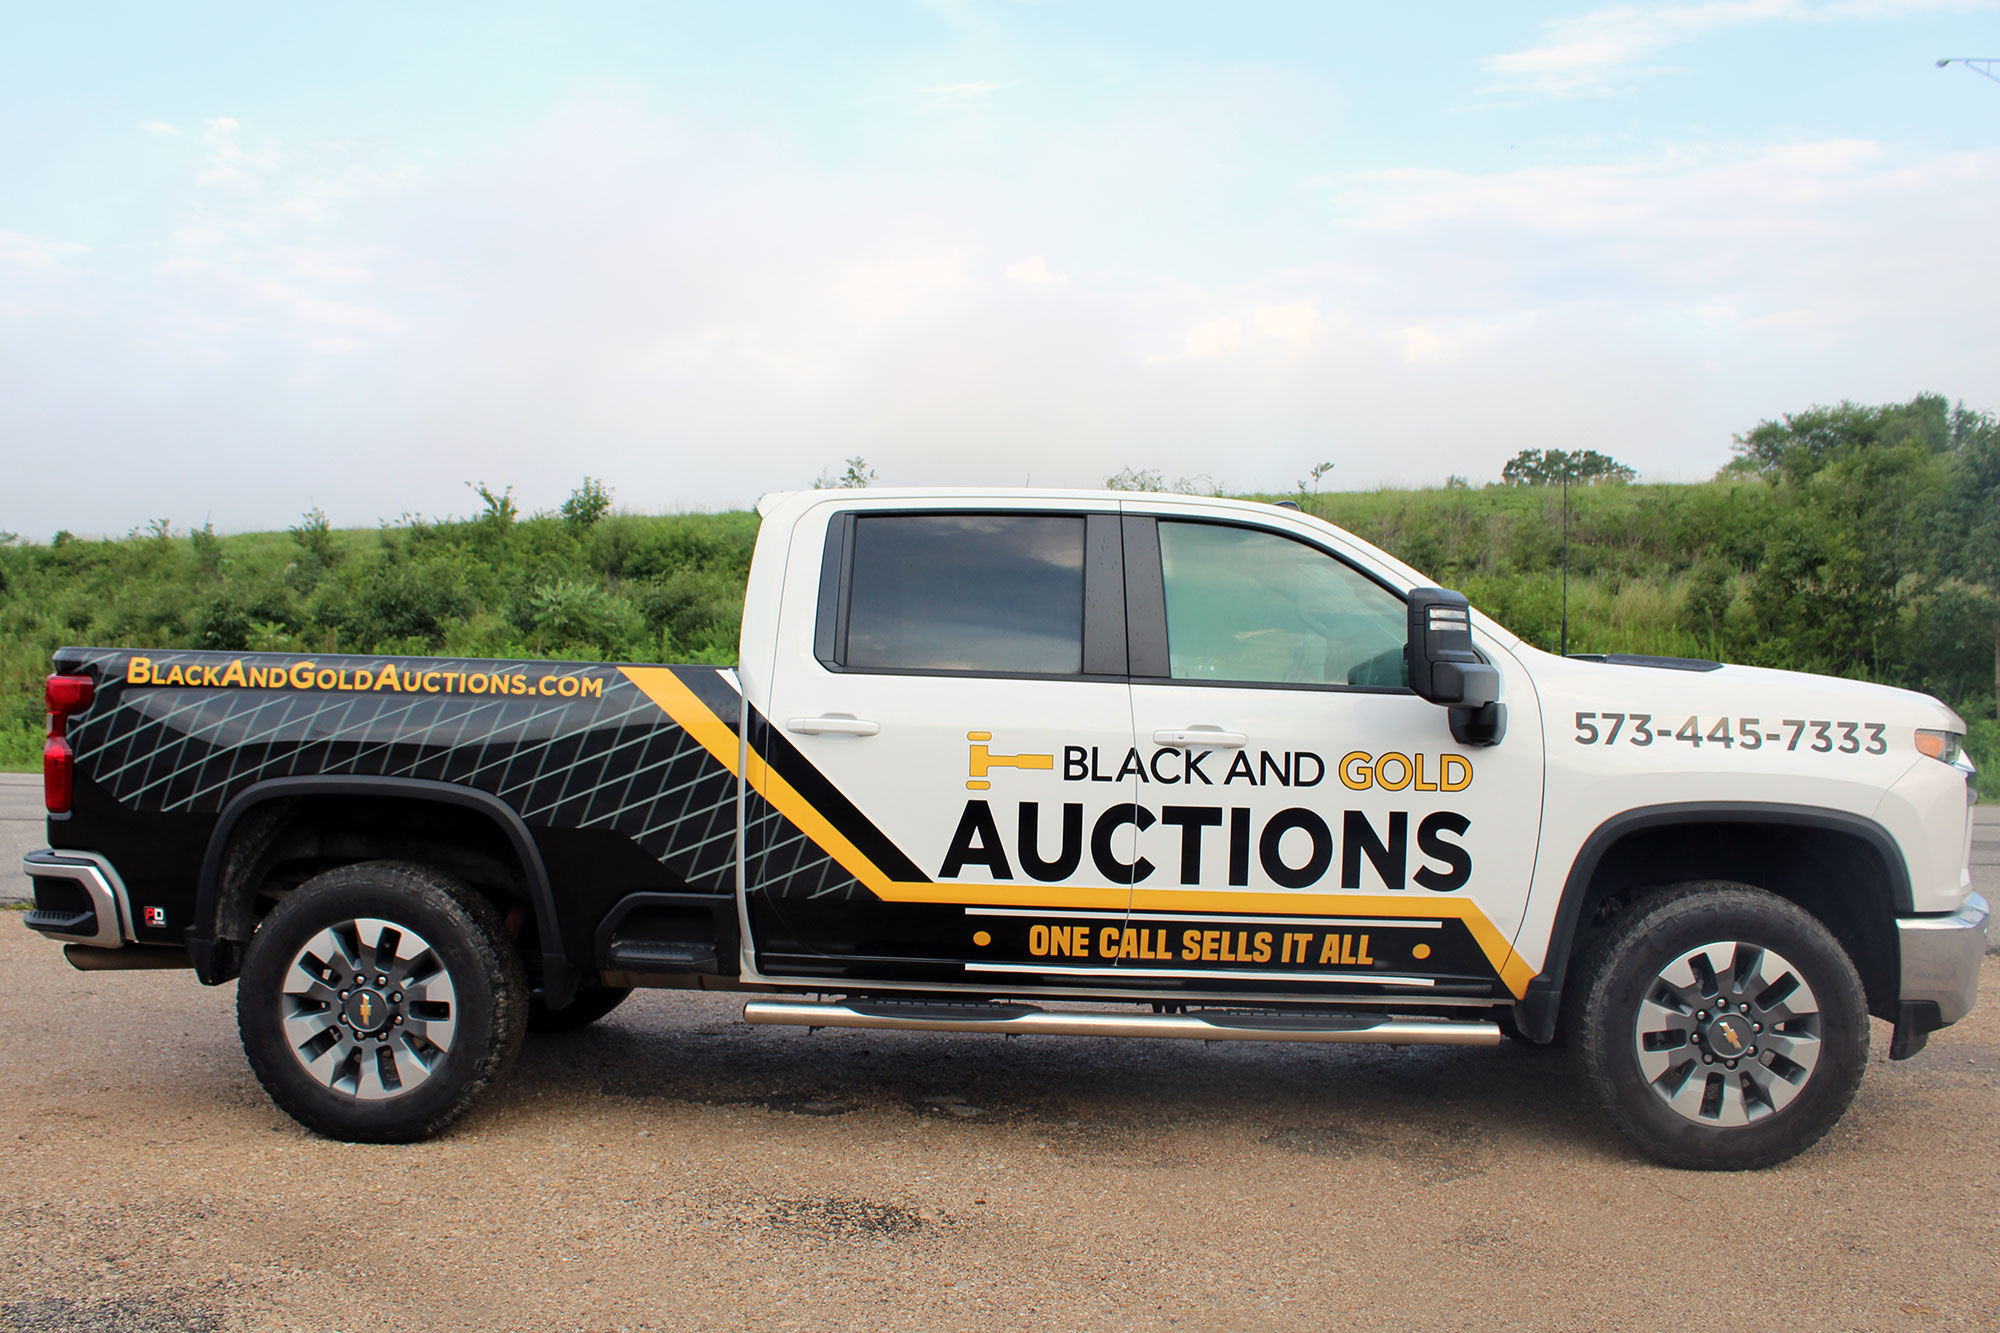 Black And Gold Auctions Vehicle Wrap Installer Pro Dezigns Columbia Mo